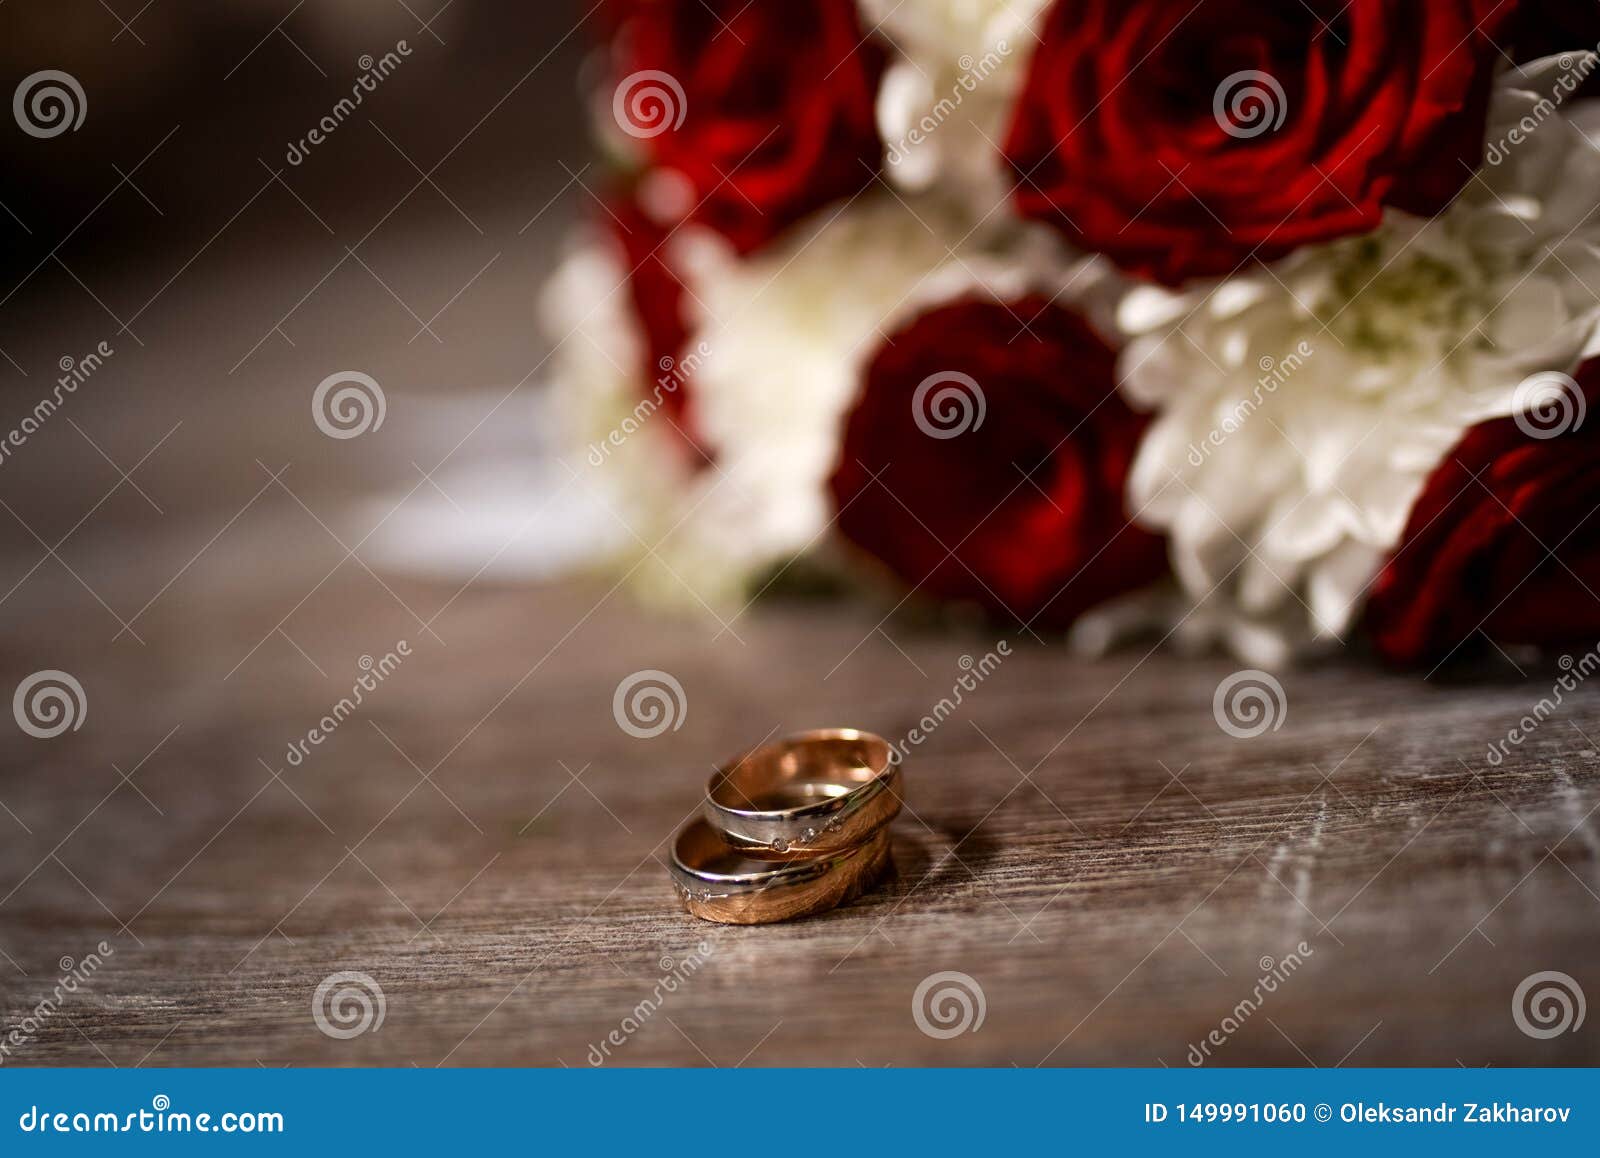 Wedding Rings and Red Roses Background Stock Photo - Image of ...